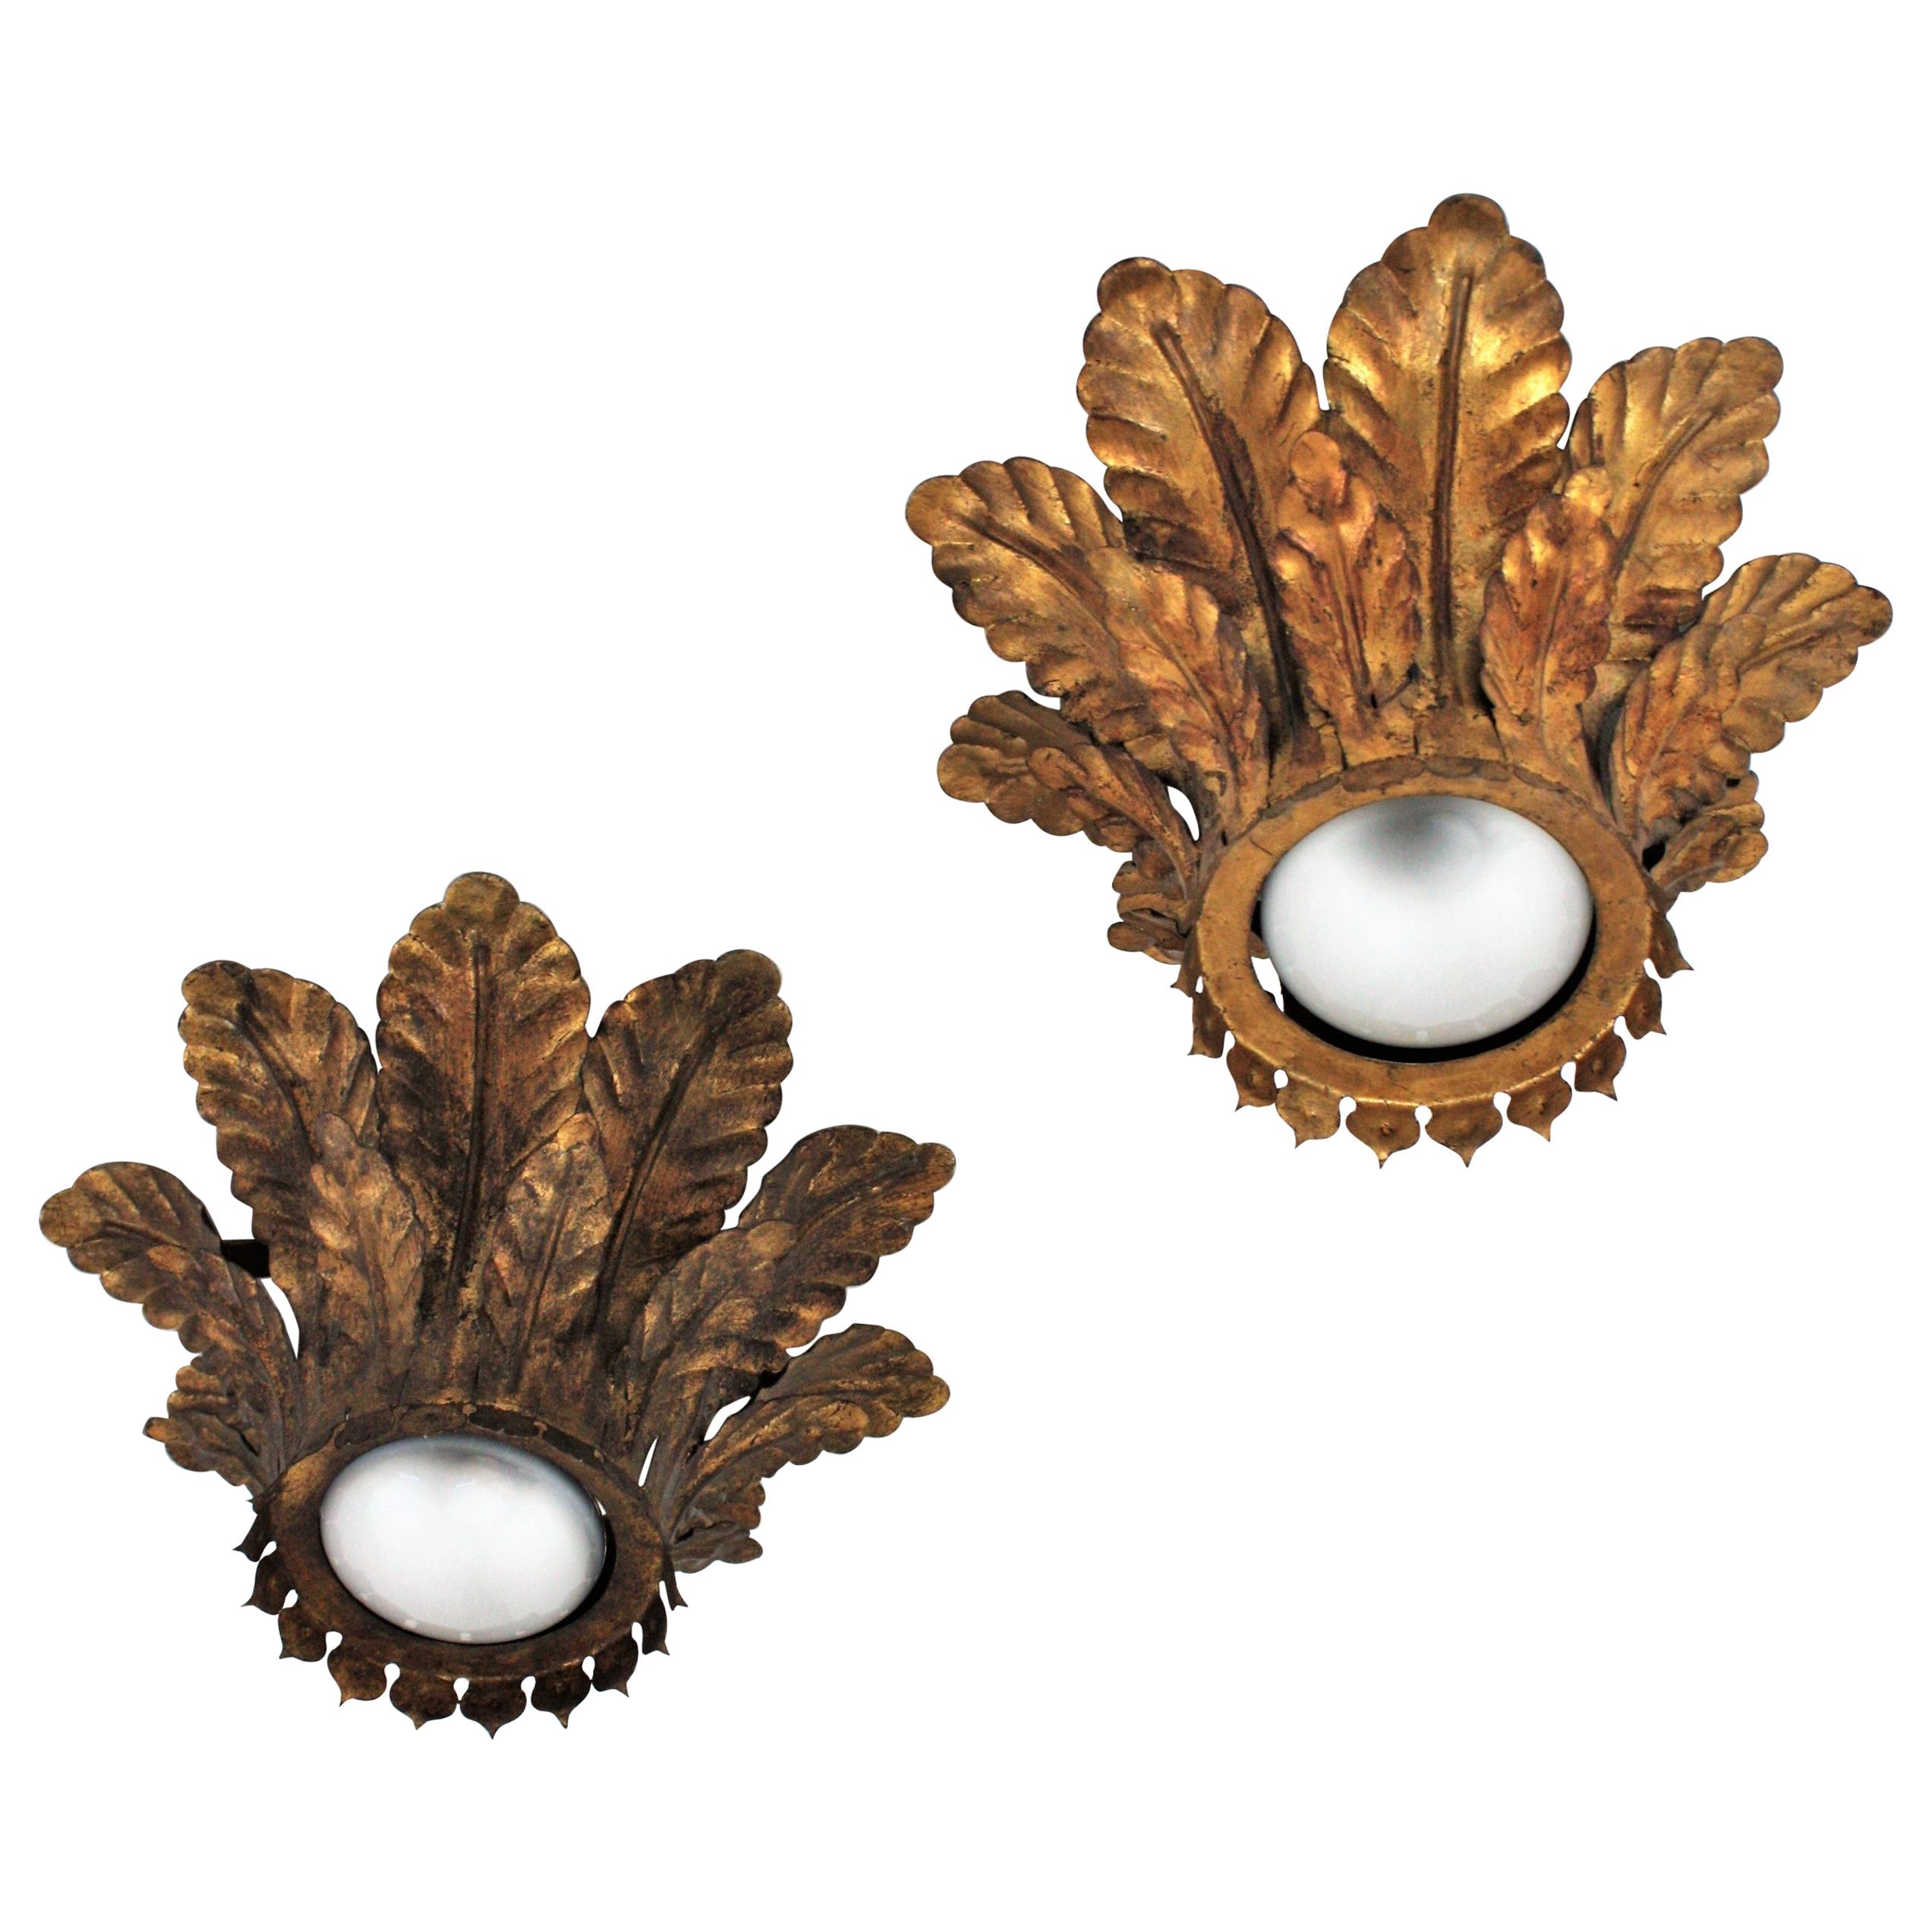 Amazing pair of wrought gilt iron foliage sunburst flush mounts. Spain, 1950s.
These eye-catching flush mounts feature crown shaped sunburst light fixtures made of two layers of iron leaves surrounding a central light with an exposed bulb. They have